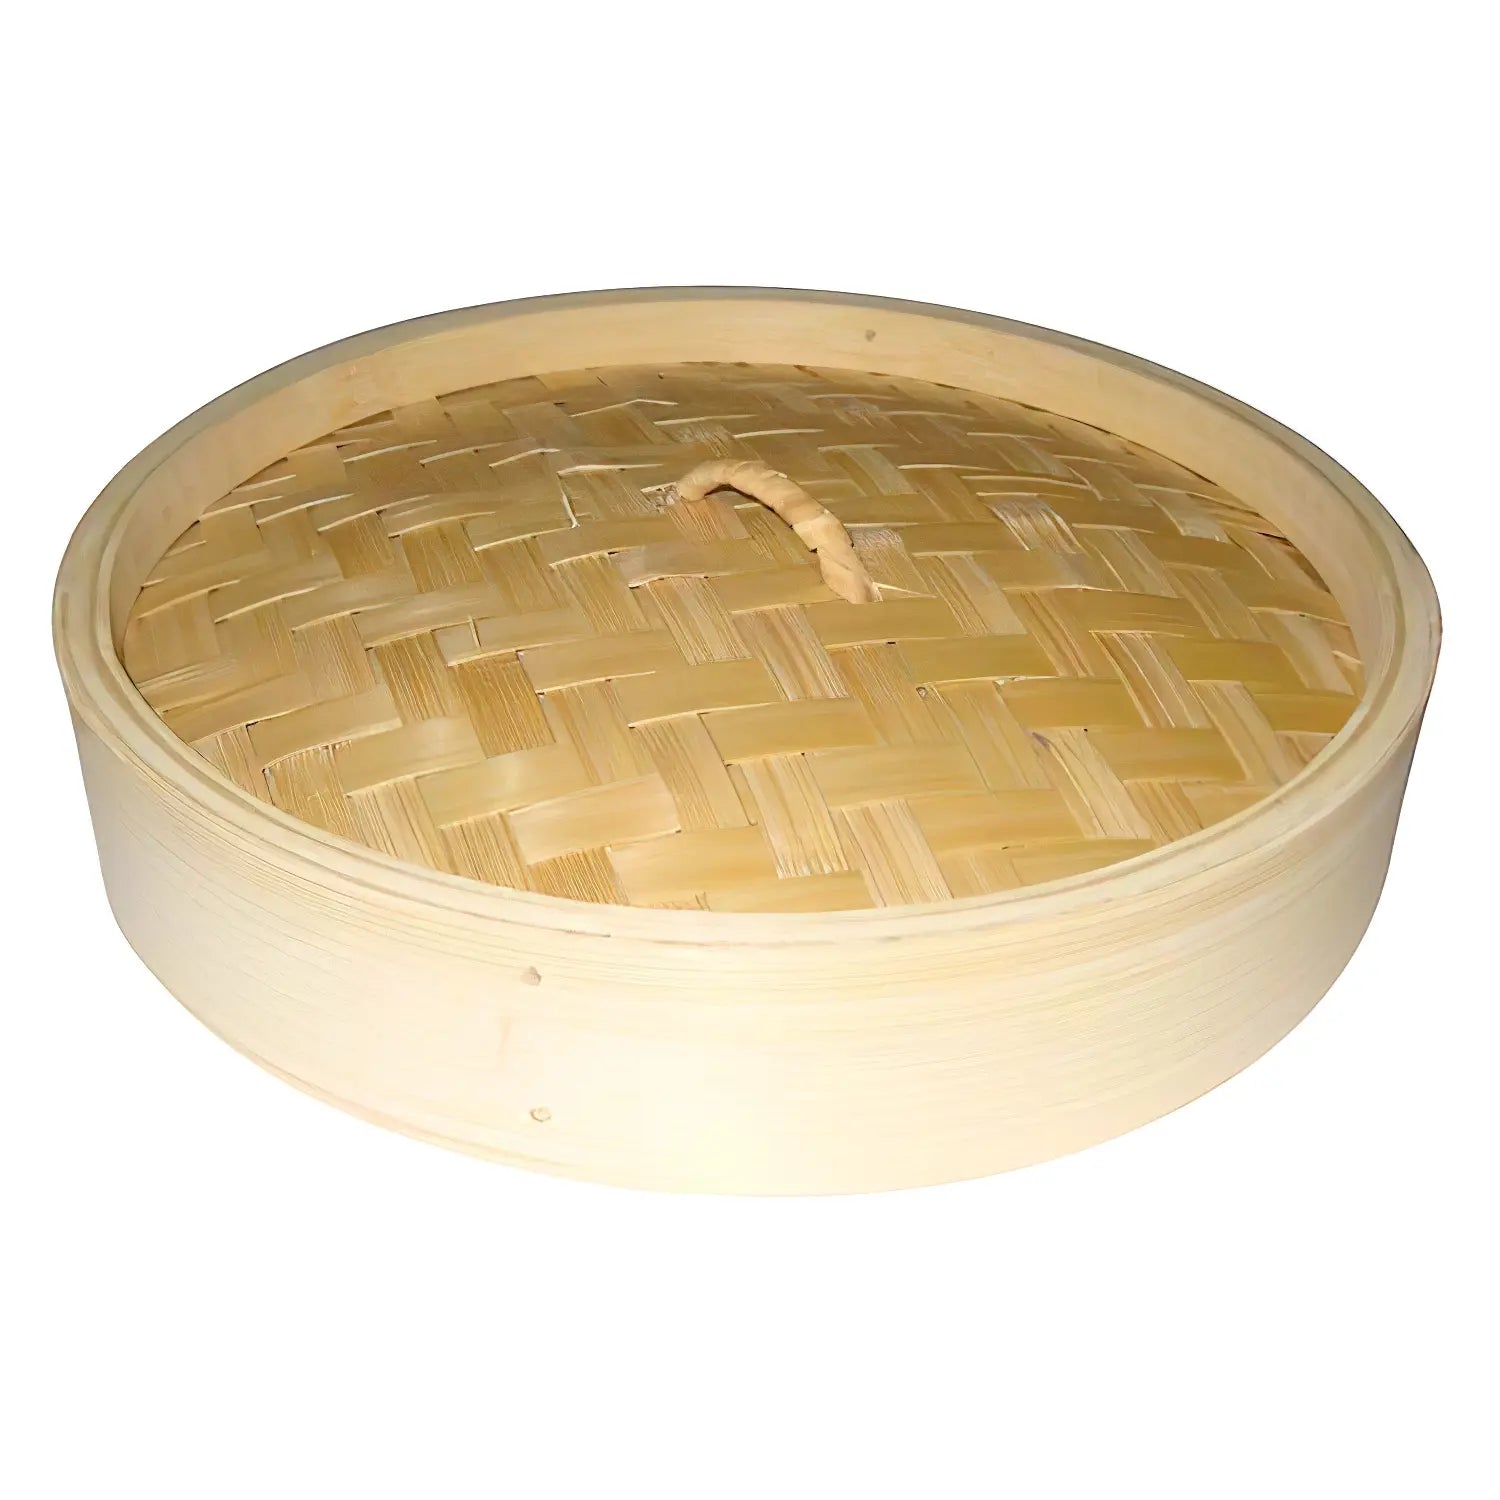 Bamboo Steamer 10cm - Lid for Ebm: Enhance Your Cooking Experience